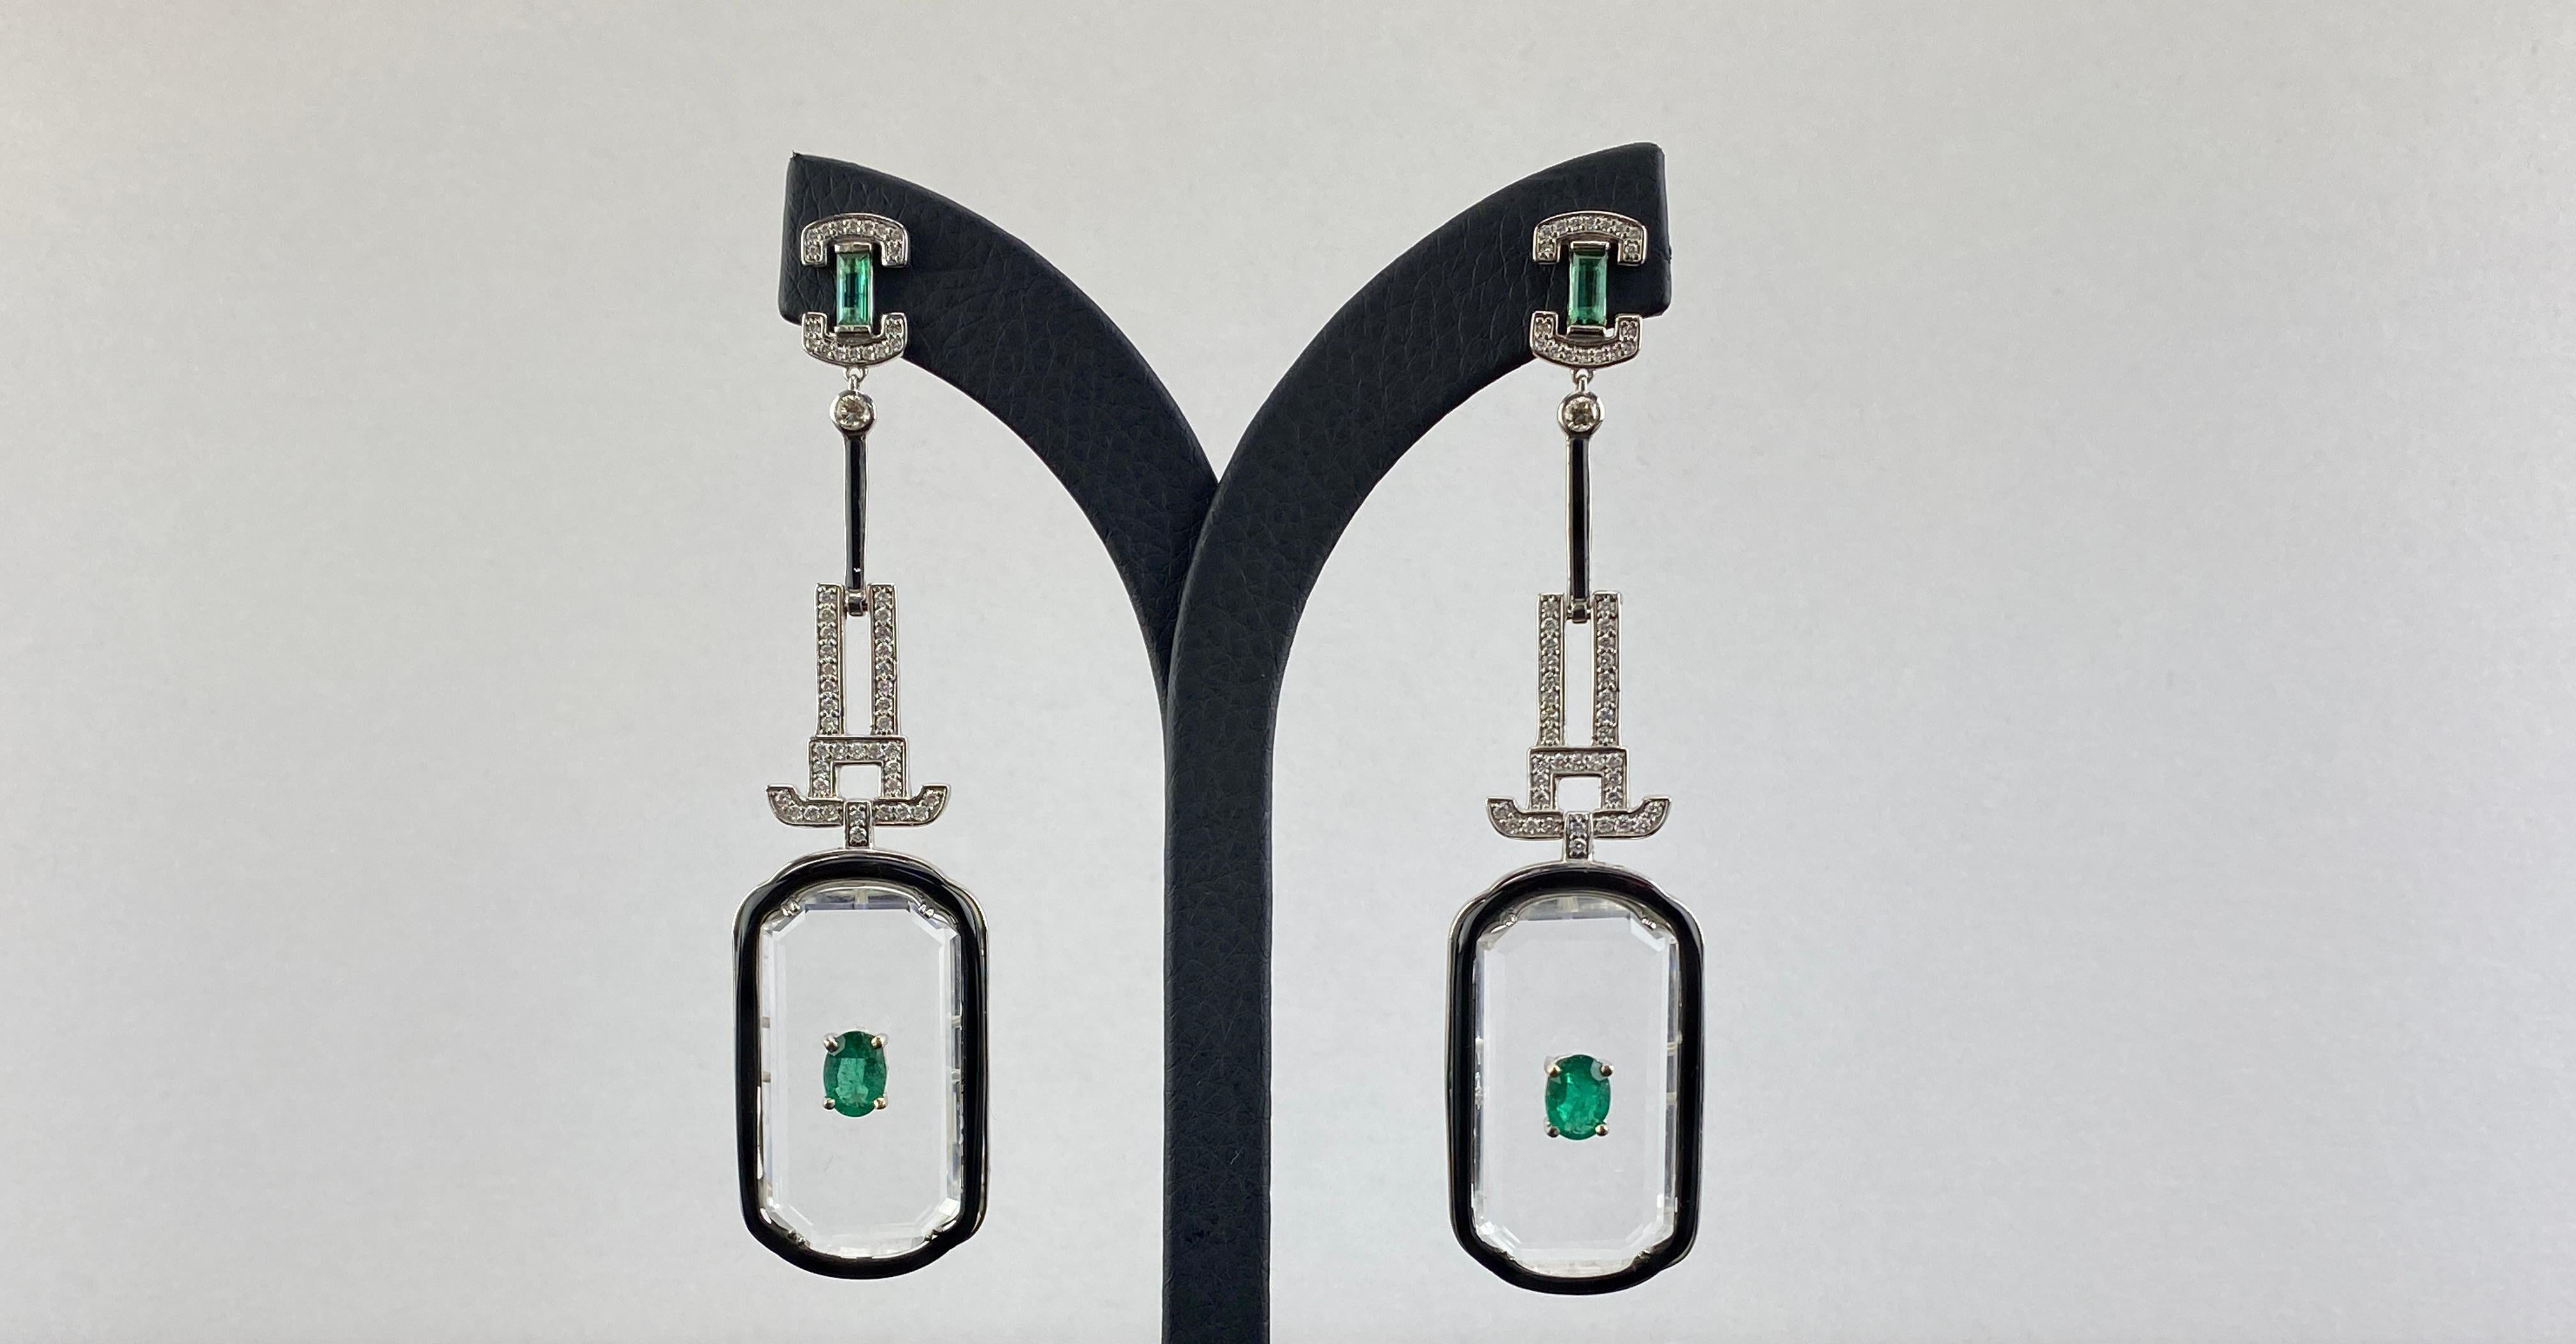 A carefully crafted 3 carat Zambian Emerald studded Rock Crystal dangle earrings, with White Diamonds and Black Onyx, all set in solid 18K White Gold. This is classic replica of jewels from the art deco era. The earrings are around 3 inches long,